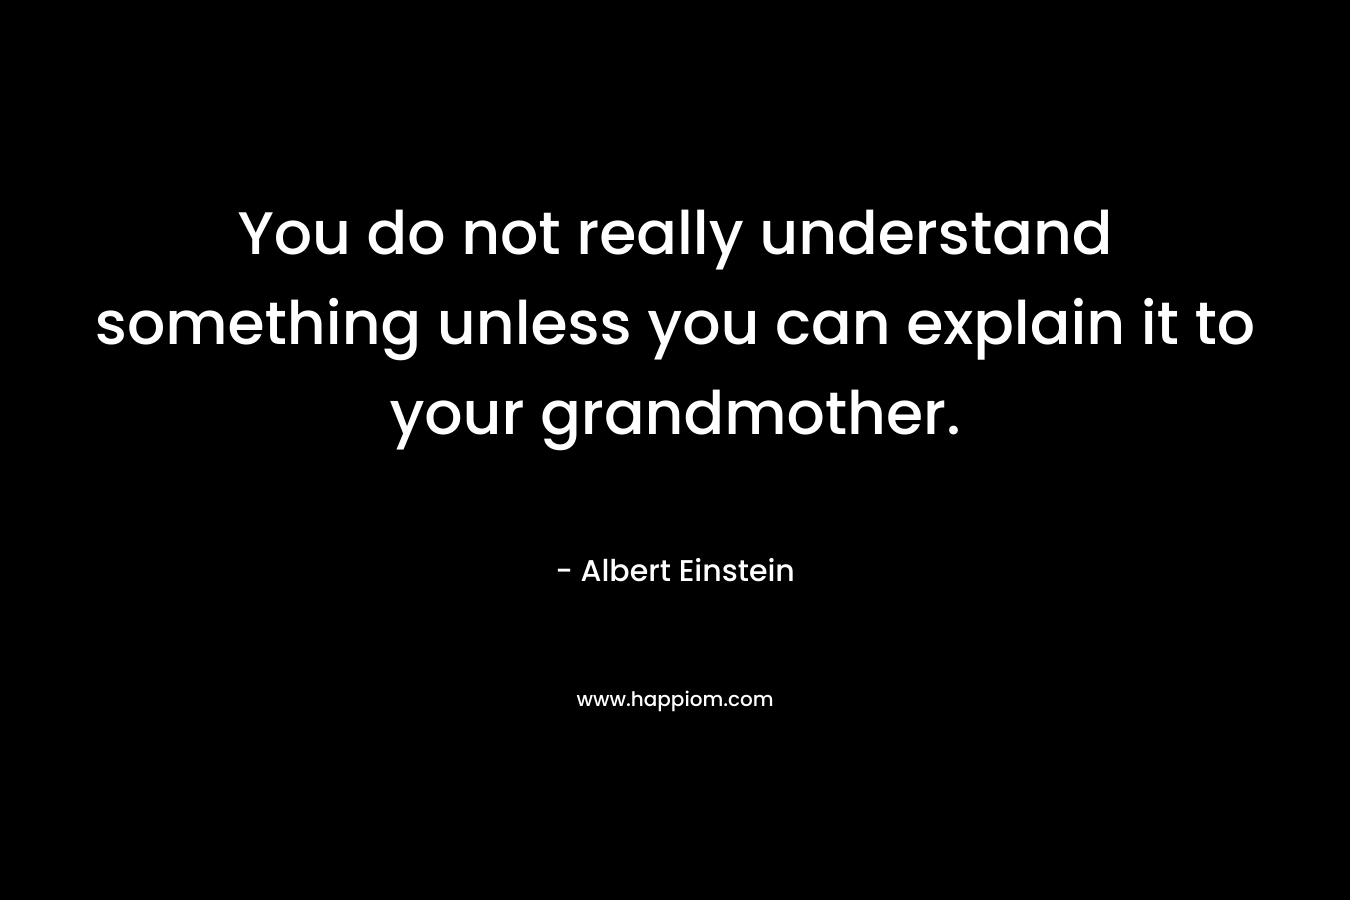 You do not really understand something unless you can explain it to your grandmother.